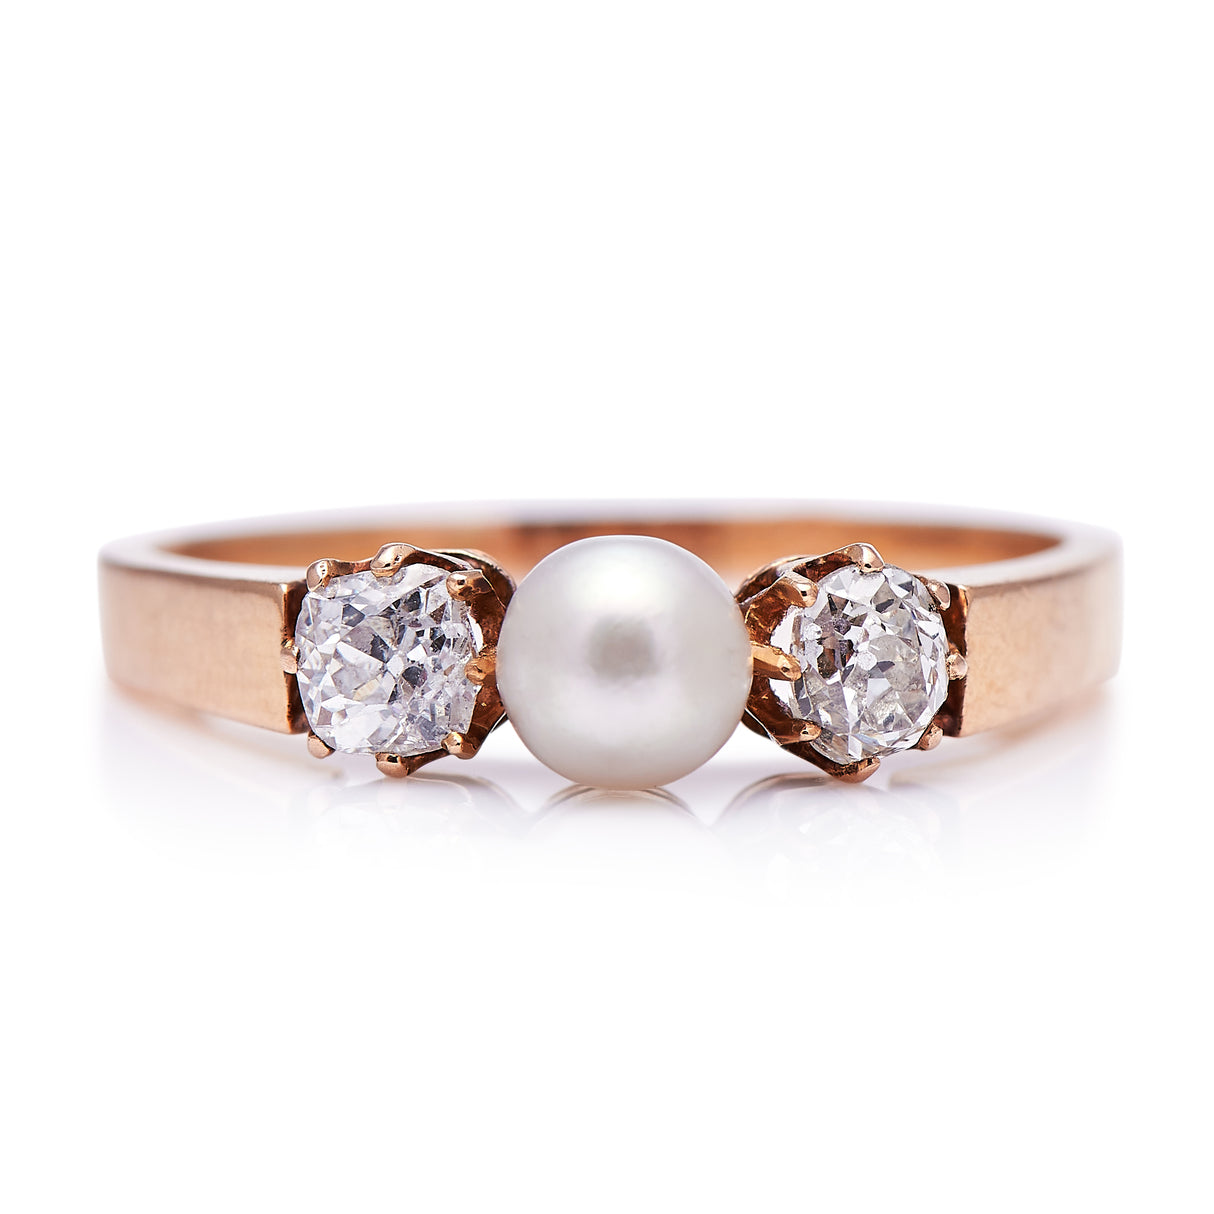 Antique Engagement Rings | Antique Ring Boutique | Vintage Engagement Rings | Antique Engagement Rings | Antique Jewellery company | Vintage Jewellery  Edwardian, French, 18ct Gold, Natural Pearl and Diamond Ring